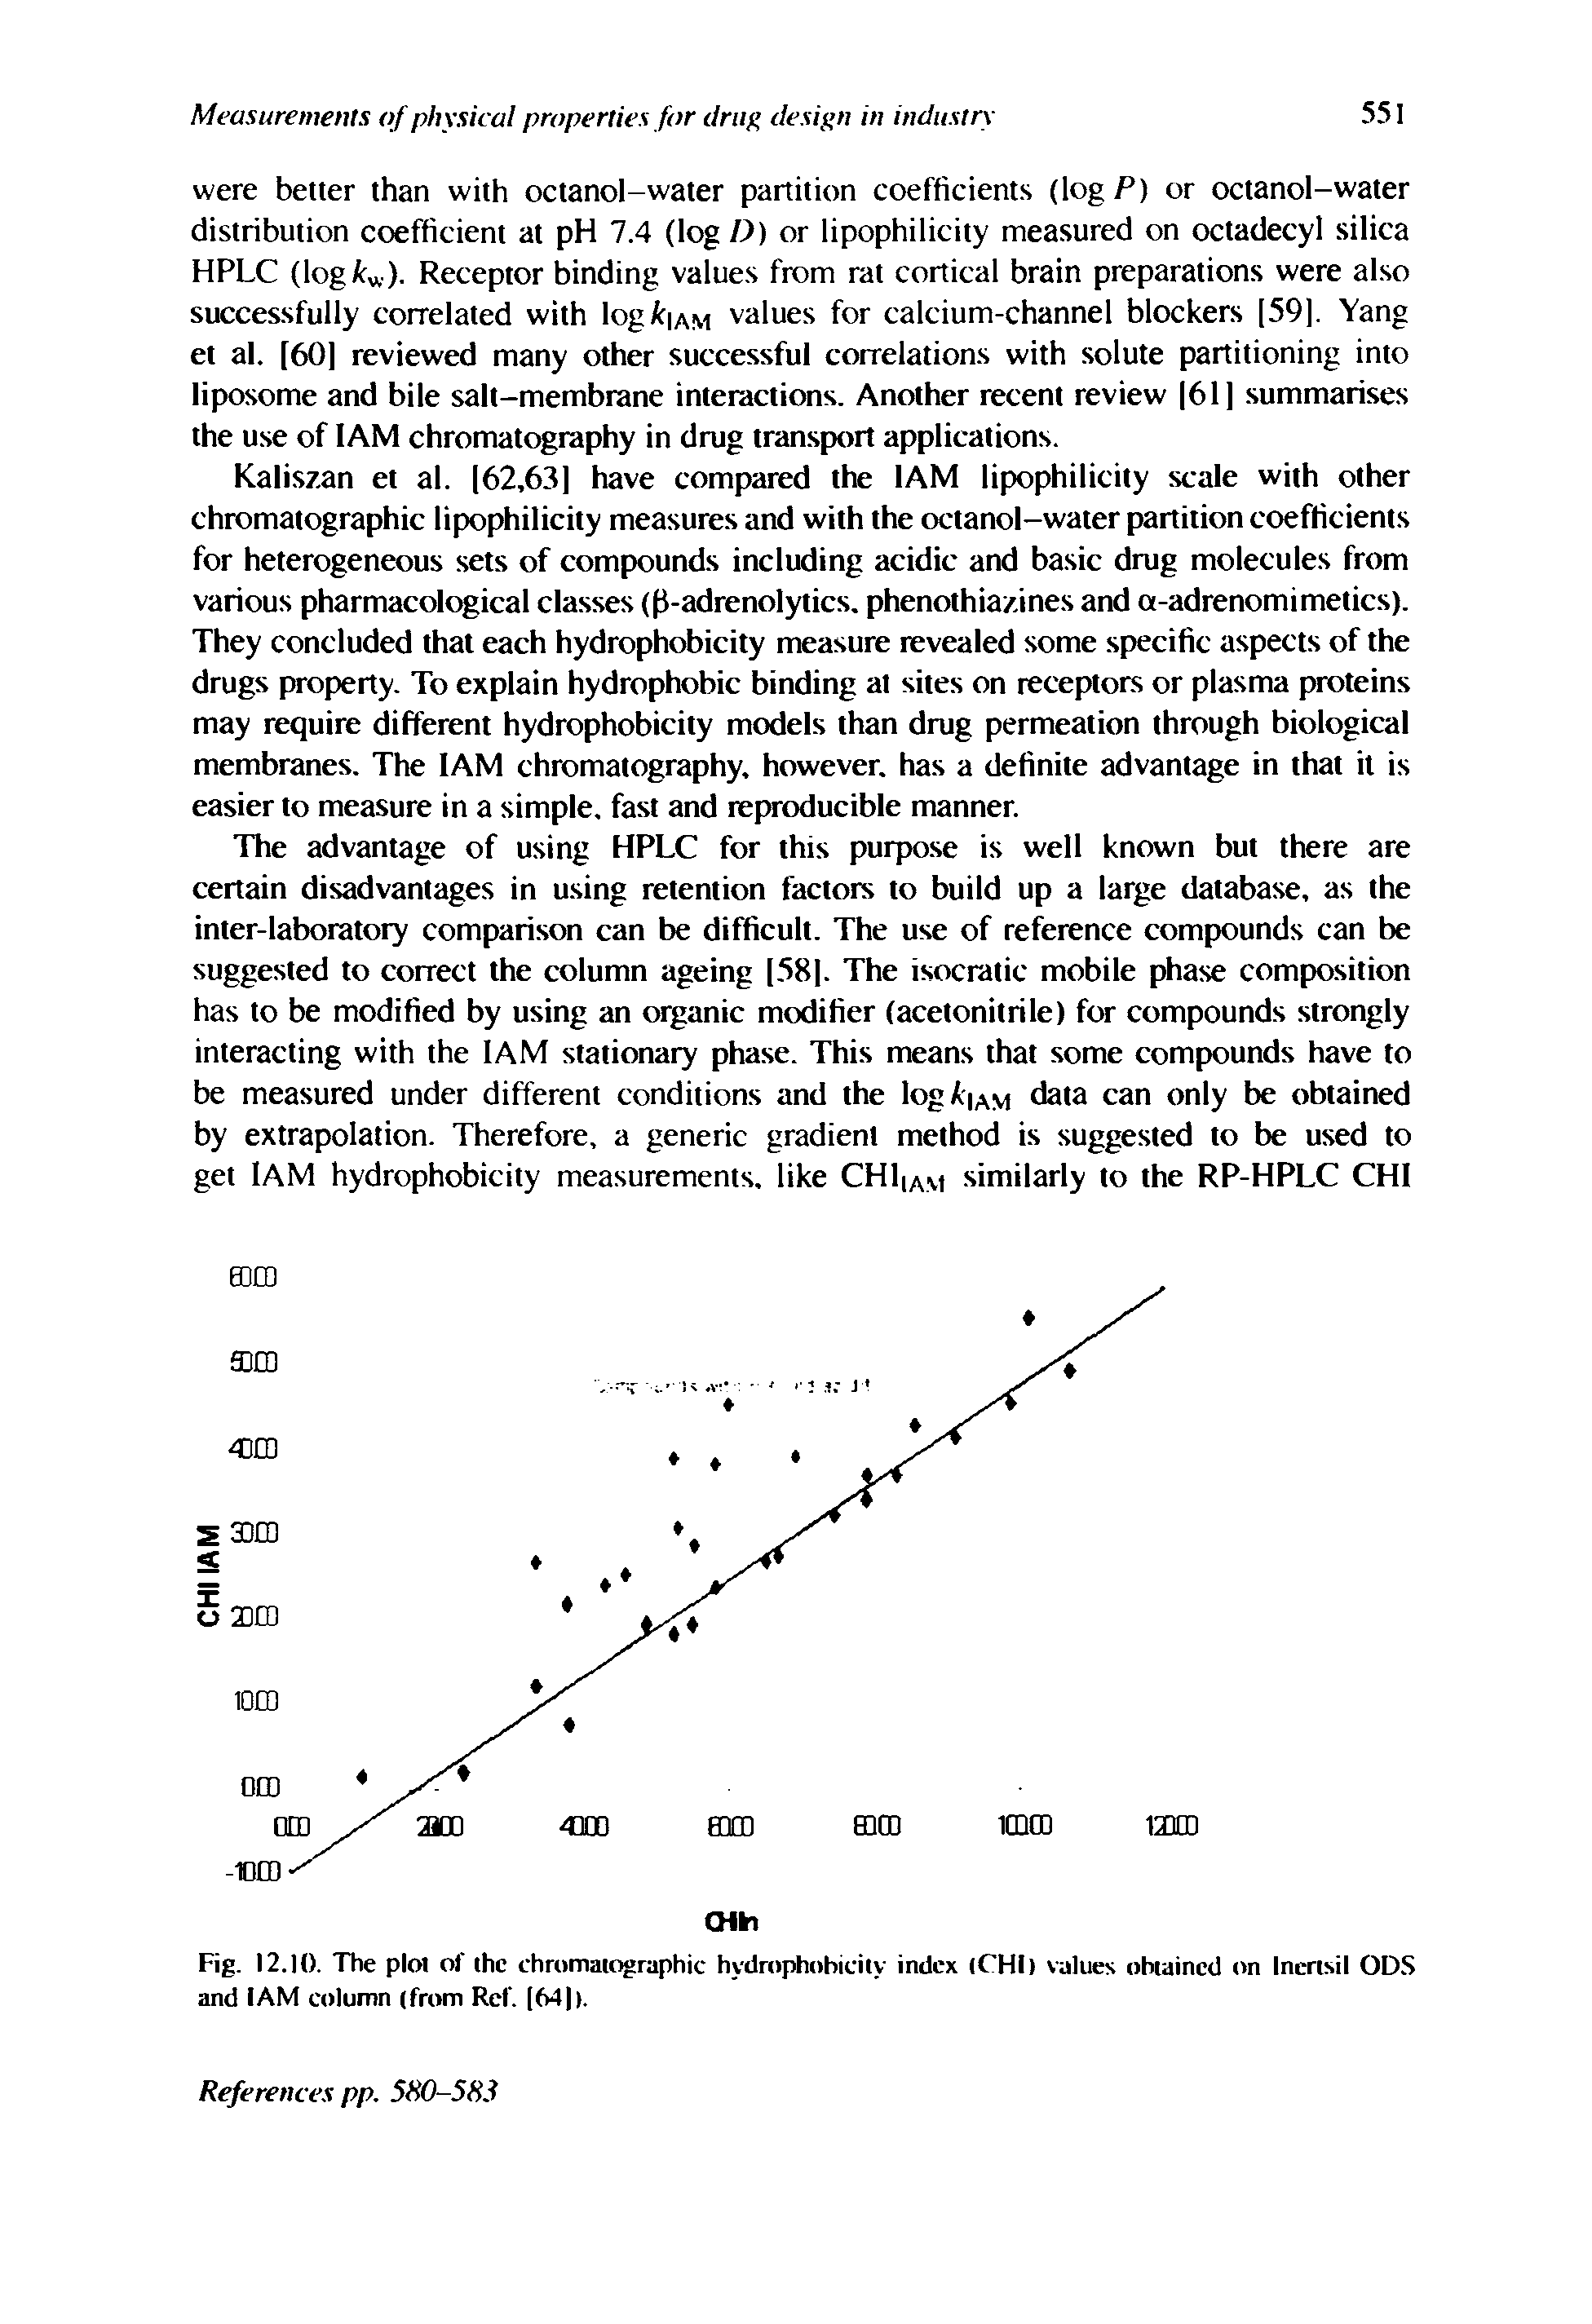 Fig. I2.lt). The plot of the chromatographic hydrophobicity index (CHI) values obtained on Inertsil ODS and lAM column (from Ref. 64 ).